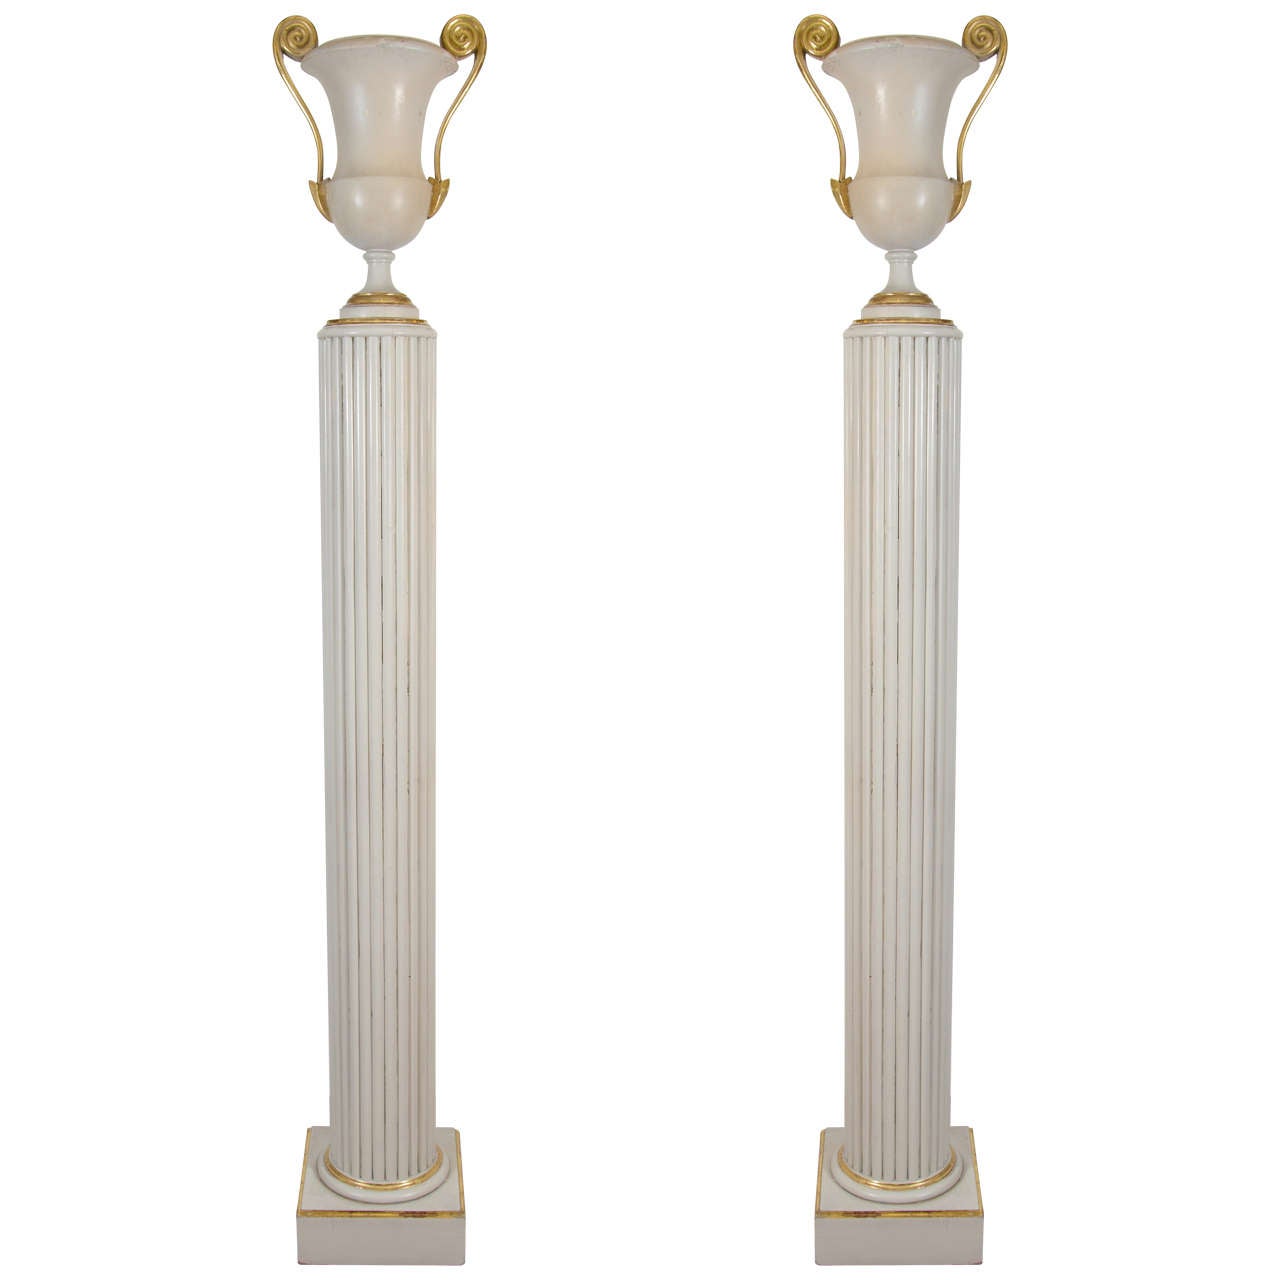 Art Deco Pair of Column Form Torchiere Lamps by Grosfeld House